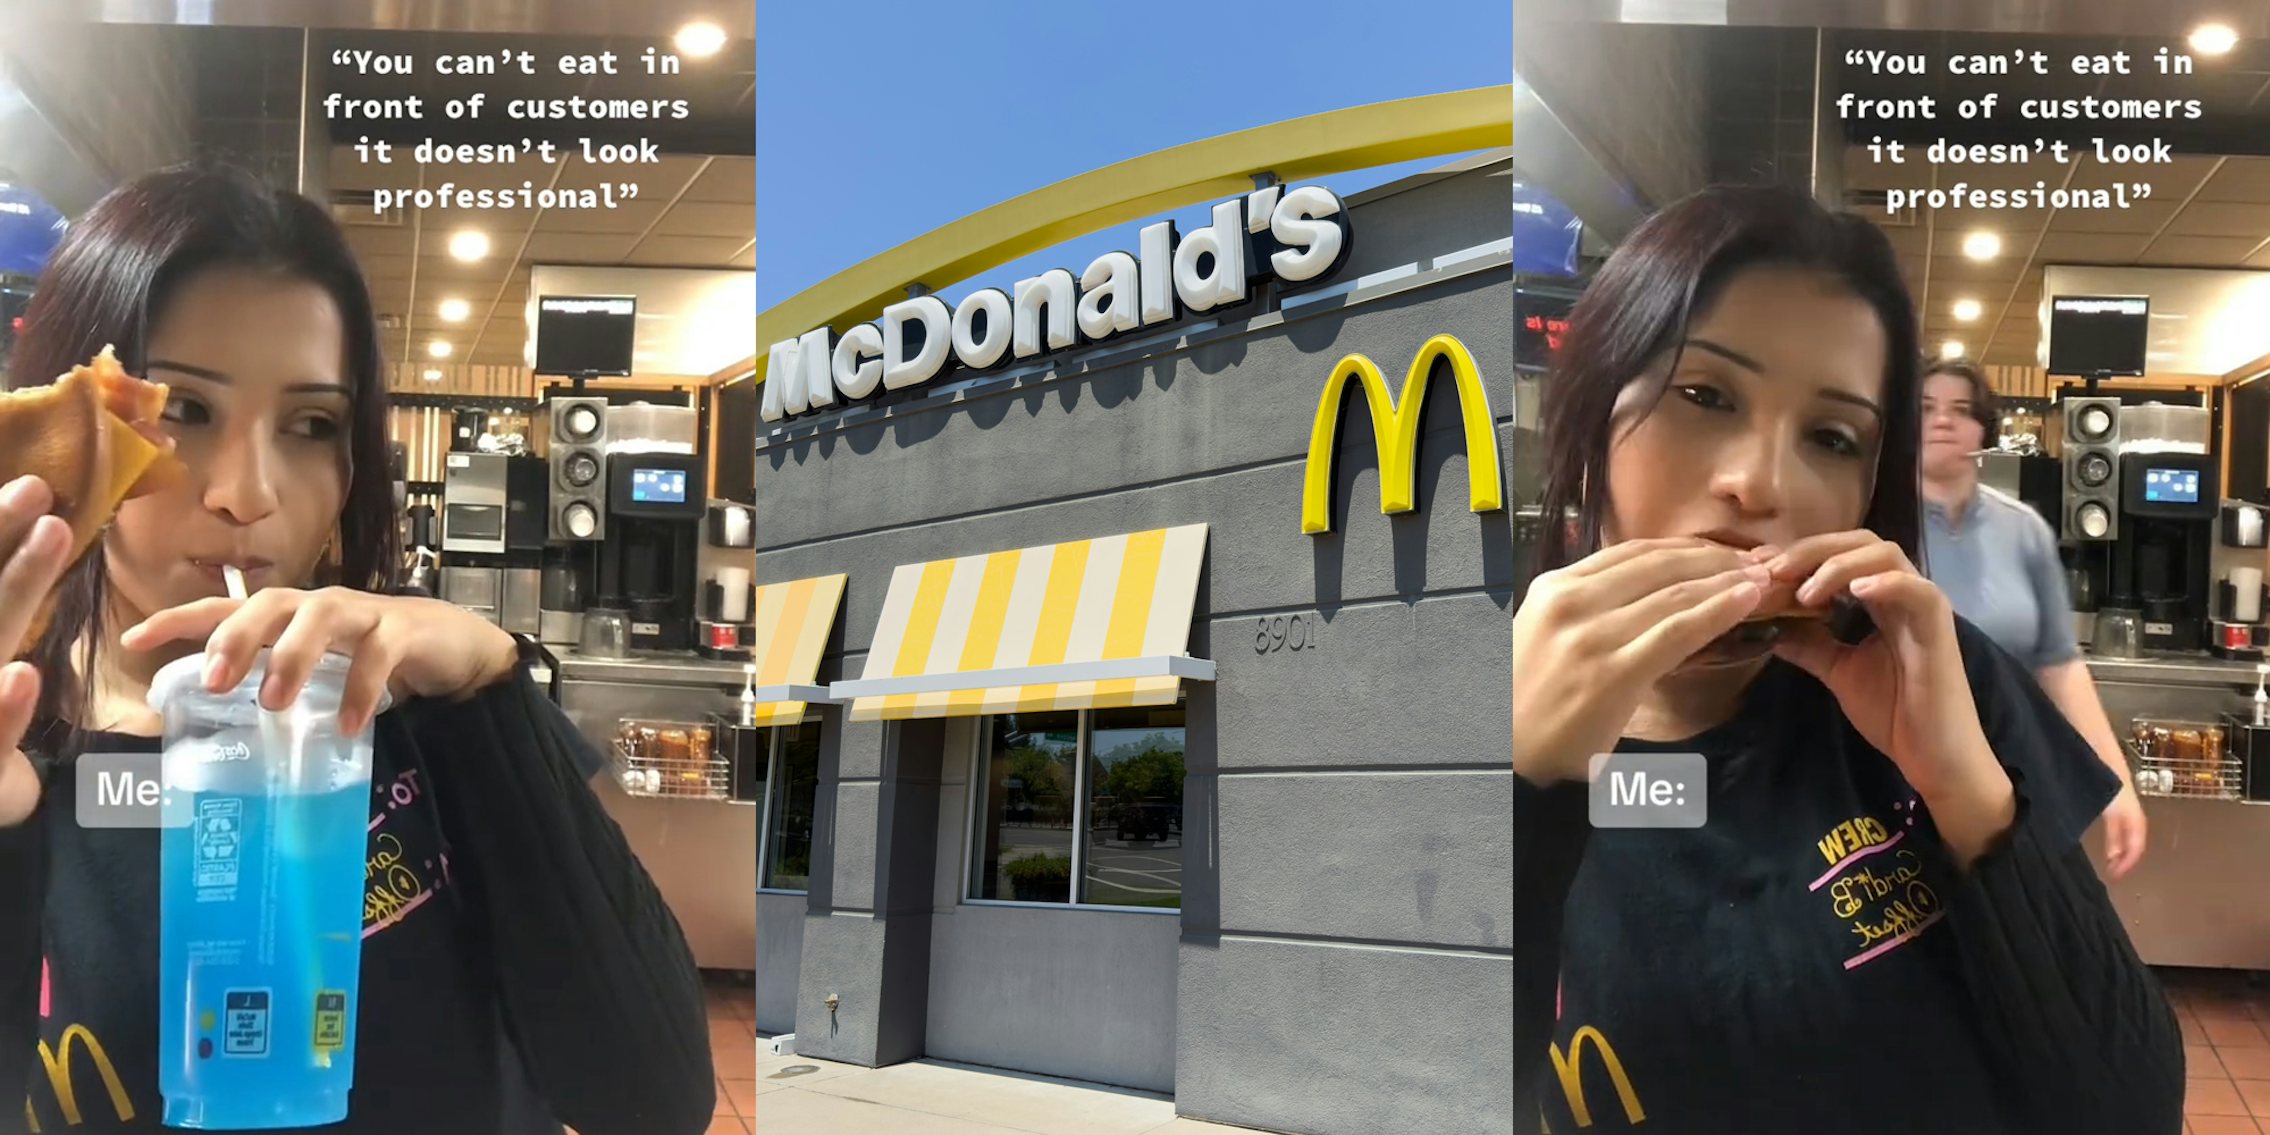 McDonald's worker eating with caption ''You can't eat in front of customers it doesn't look professional'' (l) McDonald's buildings with signs (c) McDonald's worker eating with caption ''You can't eat in front of customers it doesn't look professional'' (r)